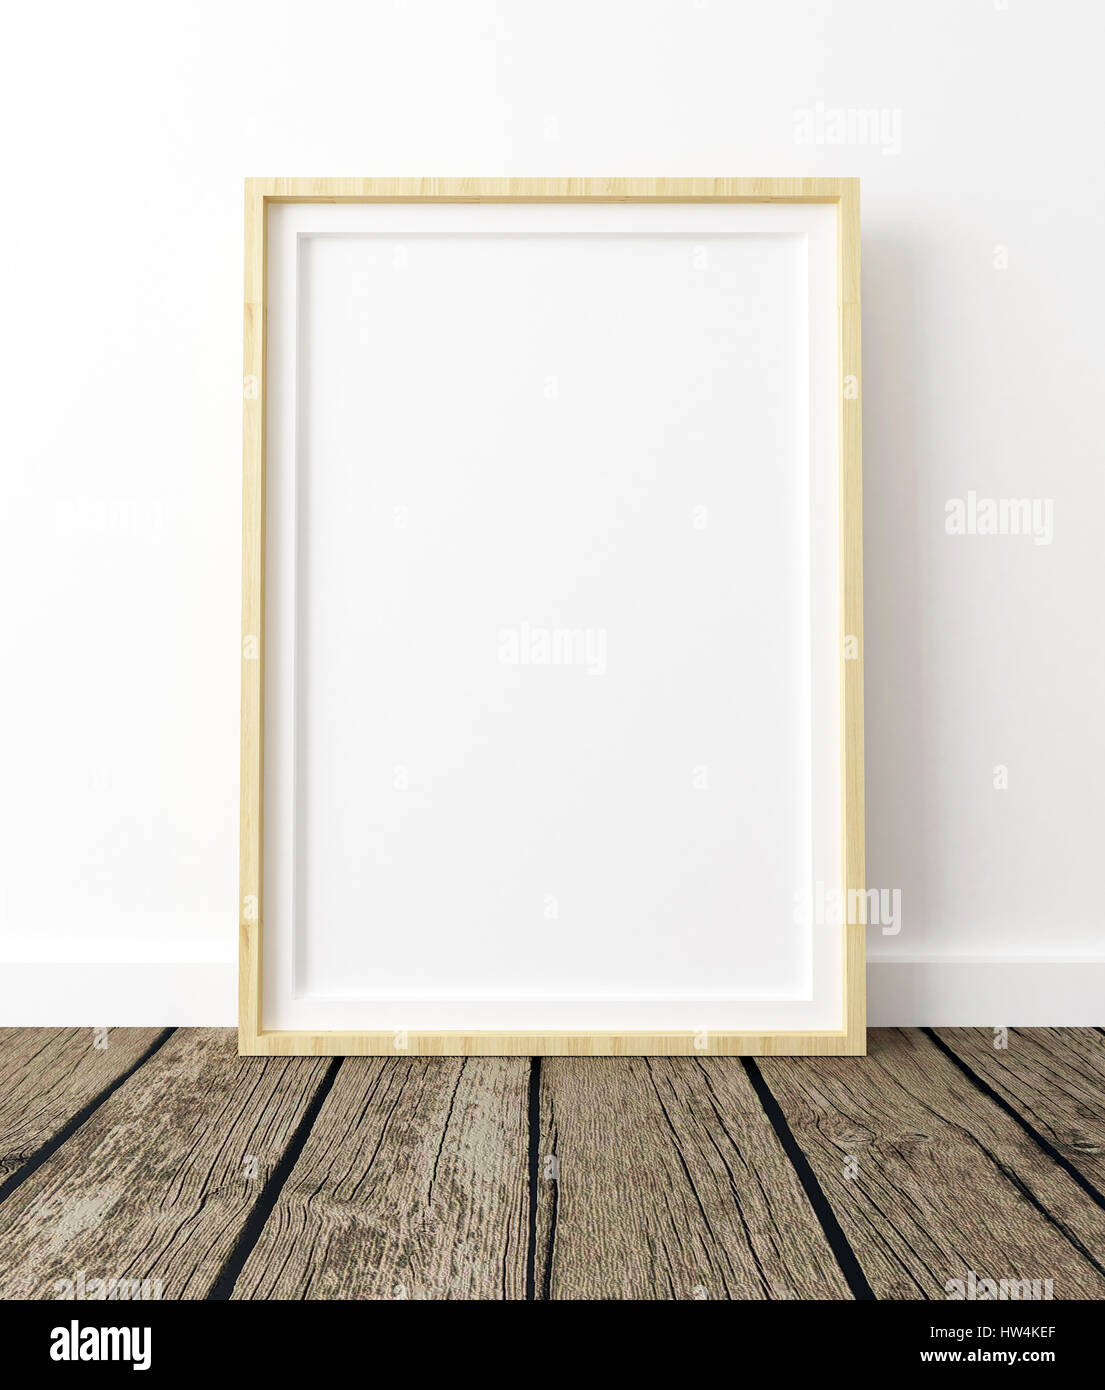 Poster Mockup On white Background, Wood Frame, Empty Interior, 3d Render Stock Photo